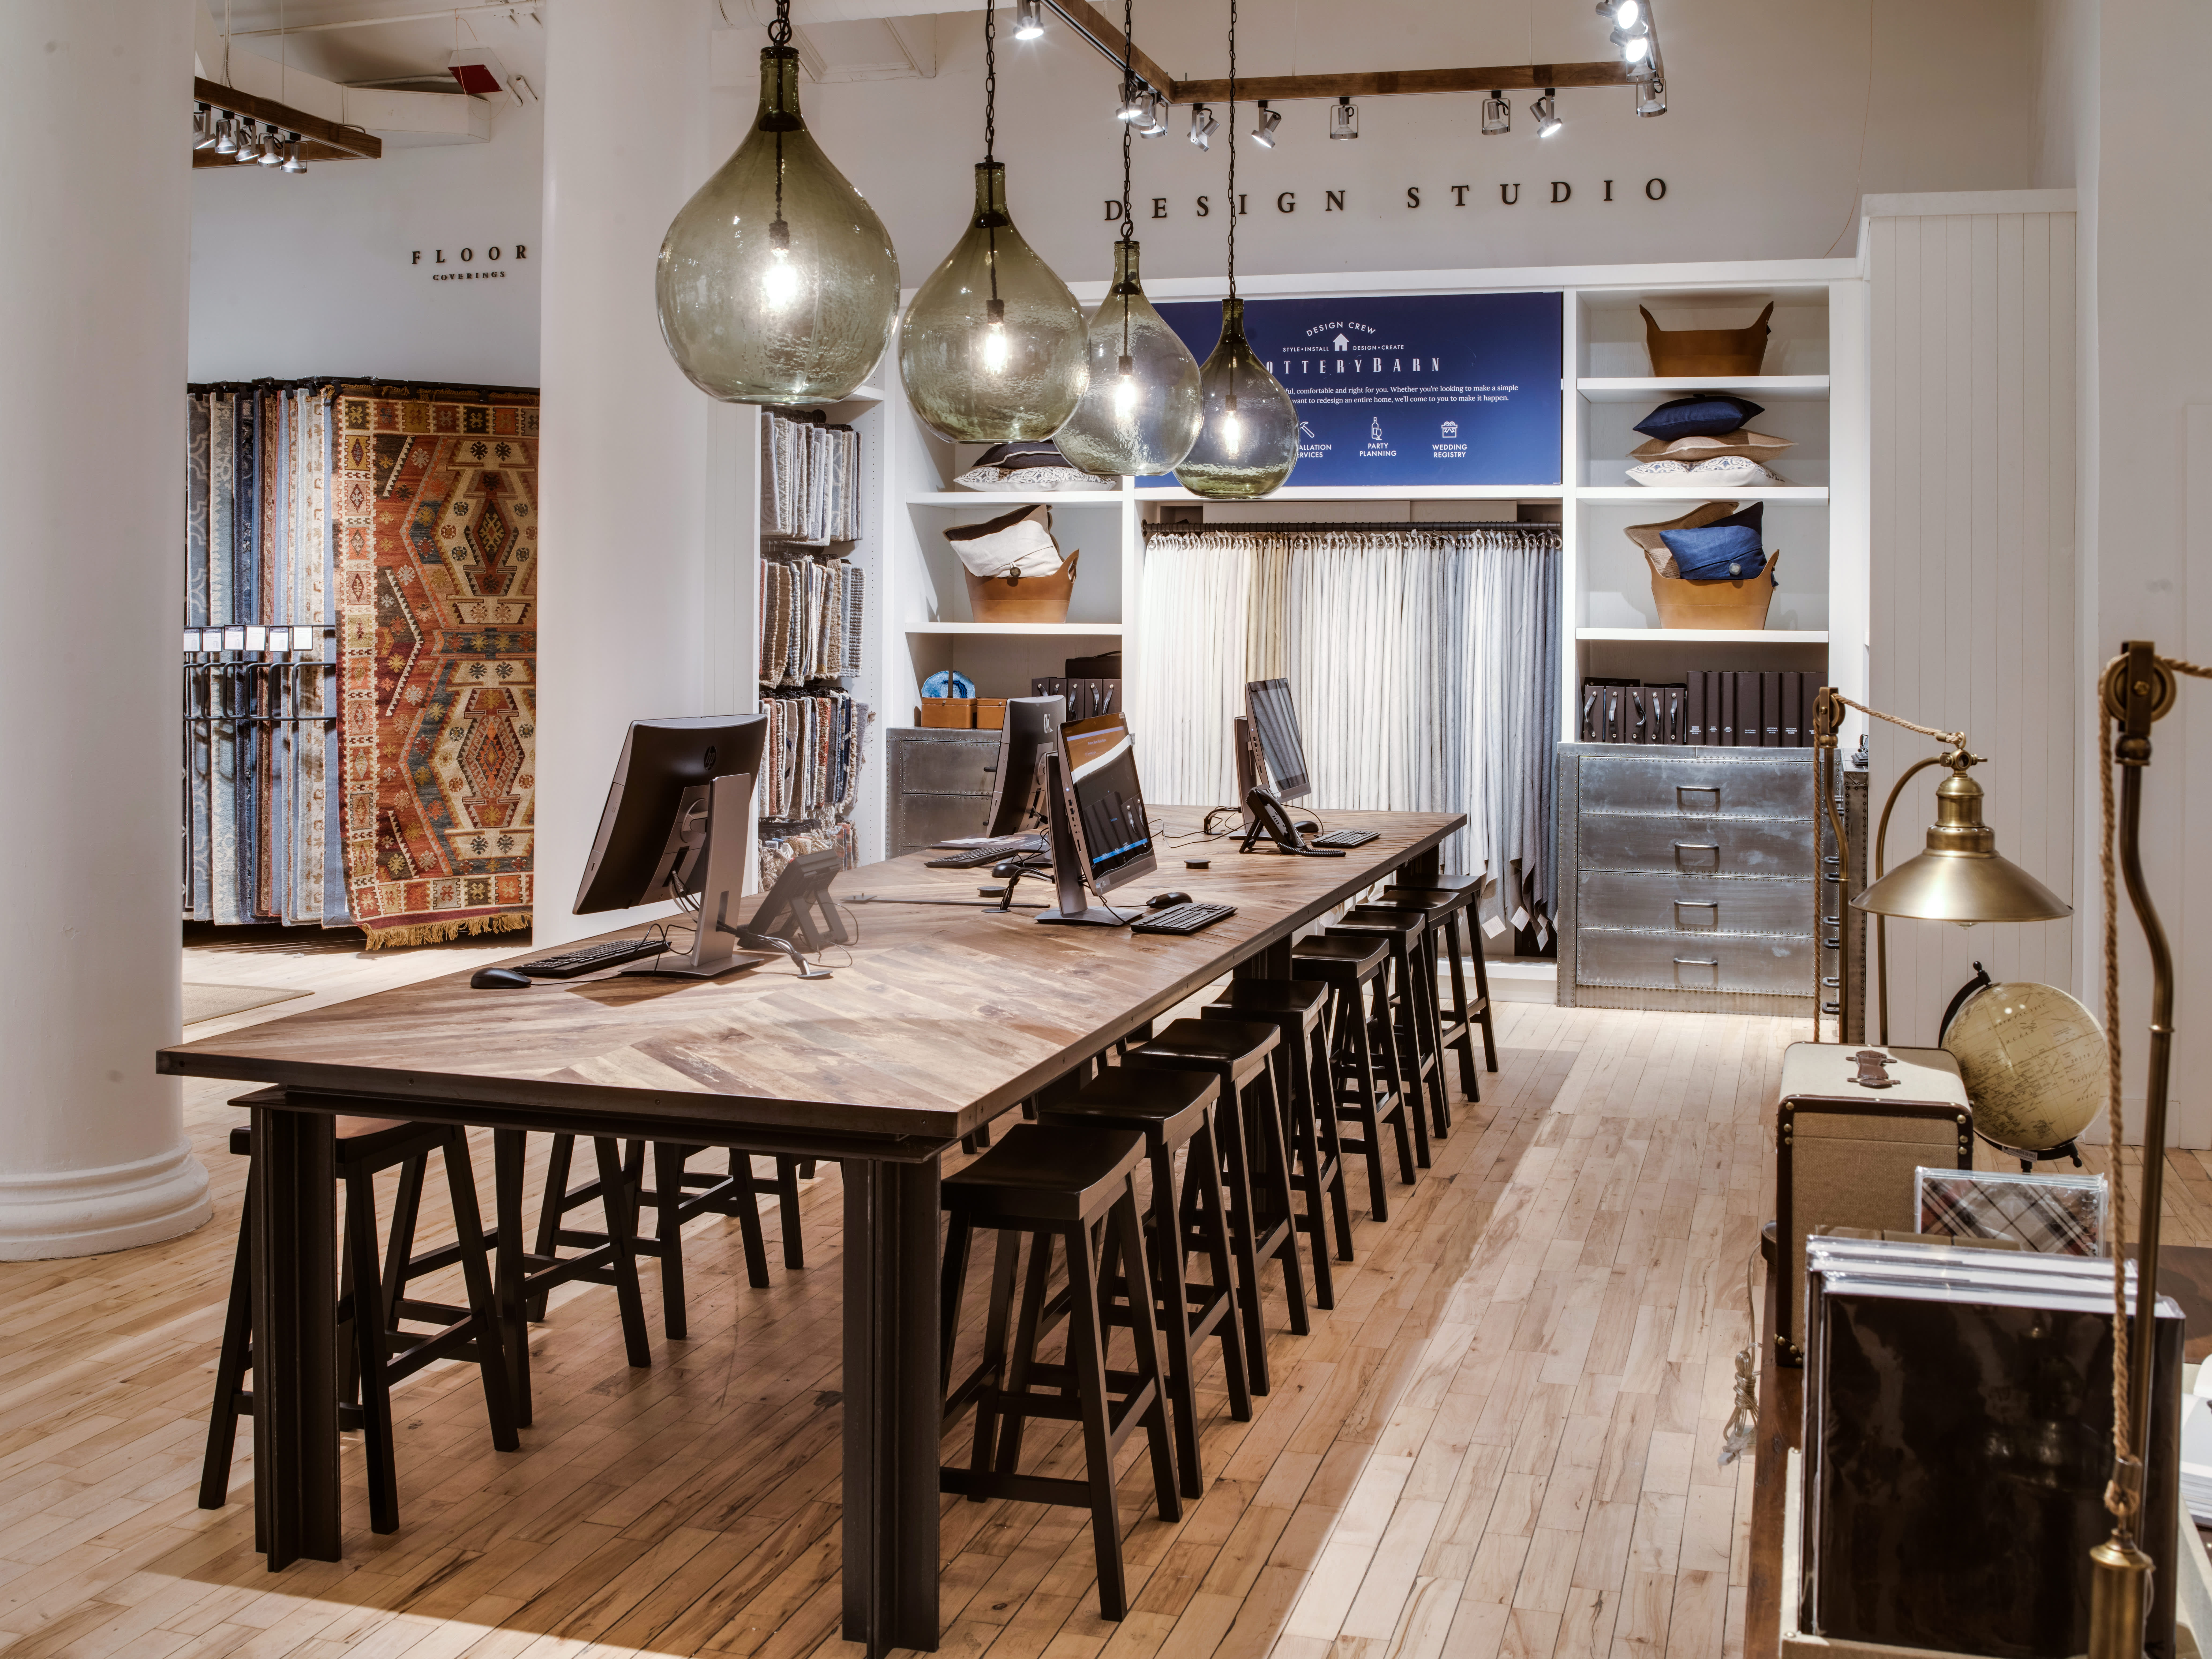 Pottery Barn's New NYC Flagship Focuses on Small Spaces, Easy